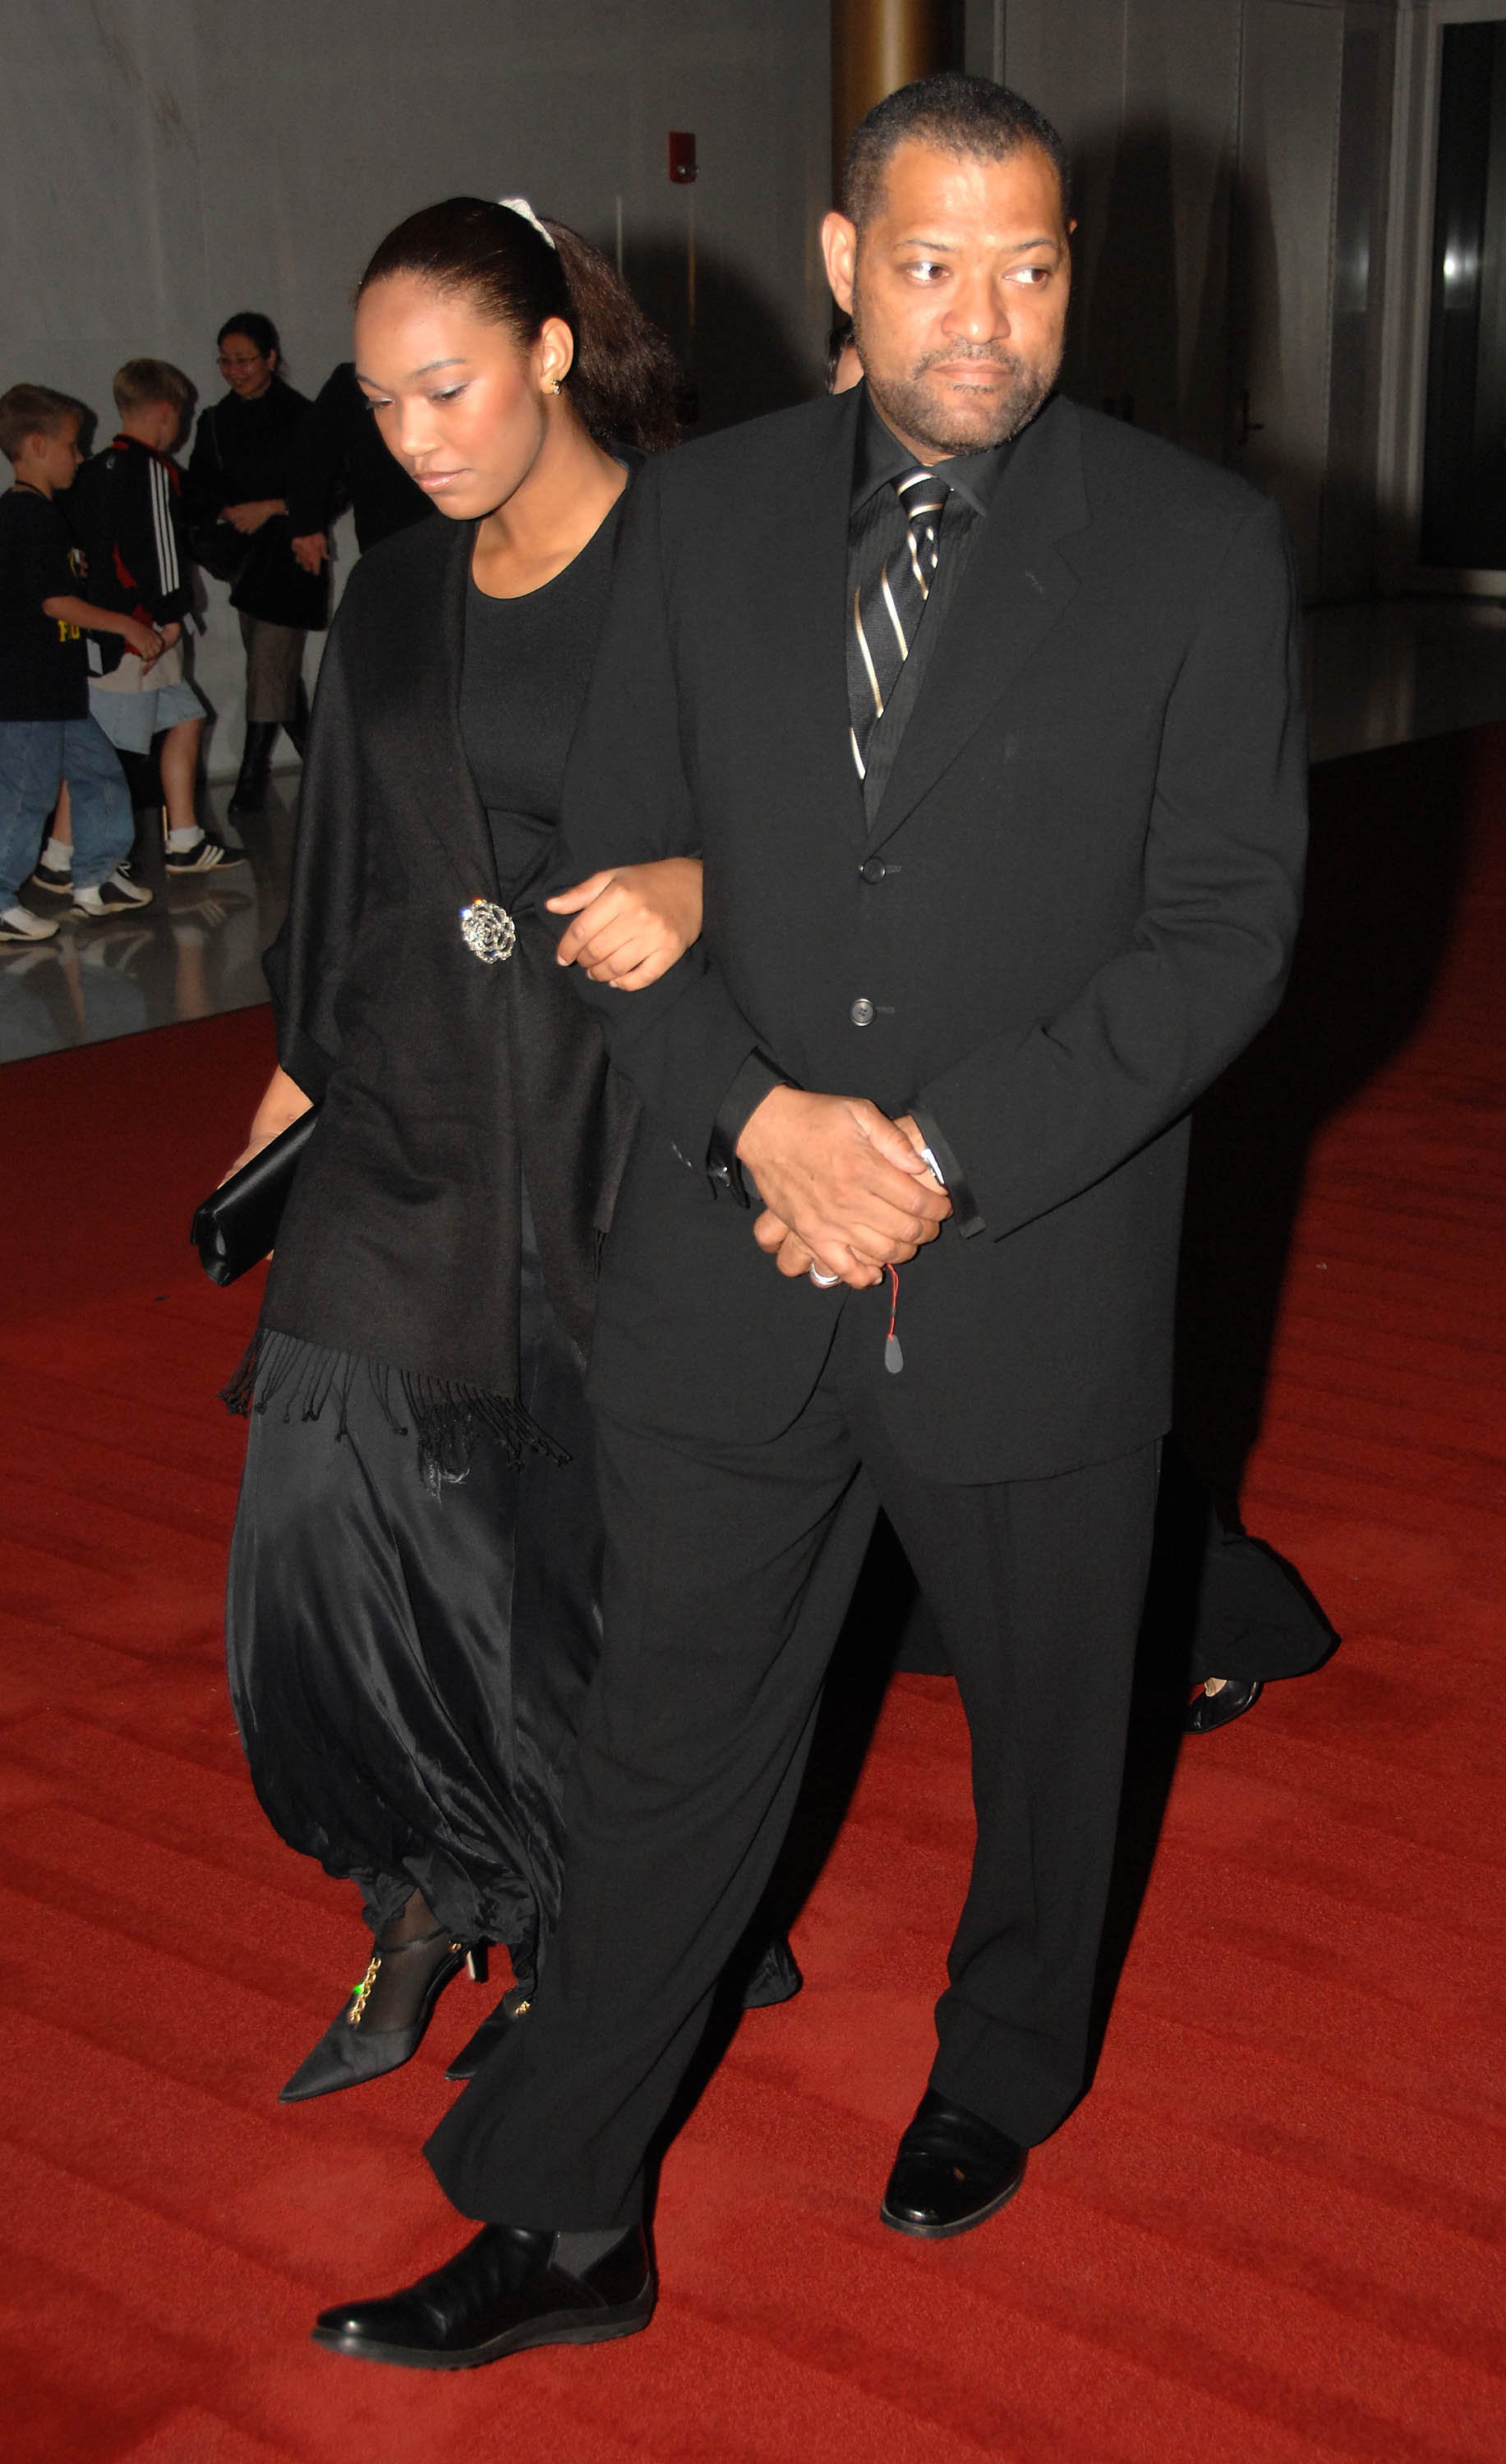 Laurence Fishburne and his daughter, Montana, on the red carpet at the National Dream Dinner Gala celebrating the Martin Luther King Jr. Memorial Groundbreaking on November 13, 2006, in Washington | Source: Getty Images